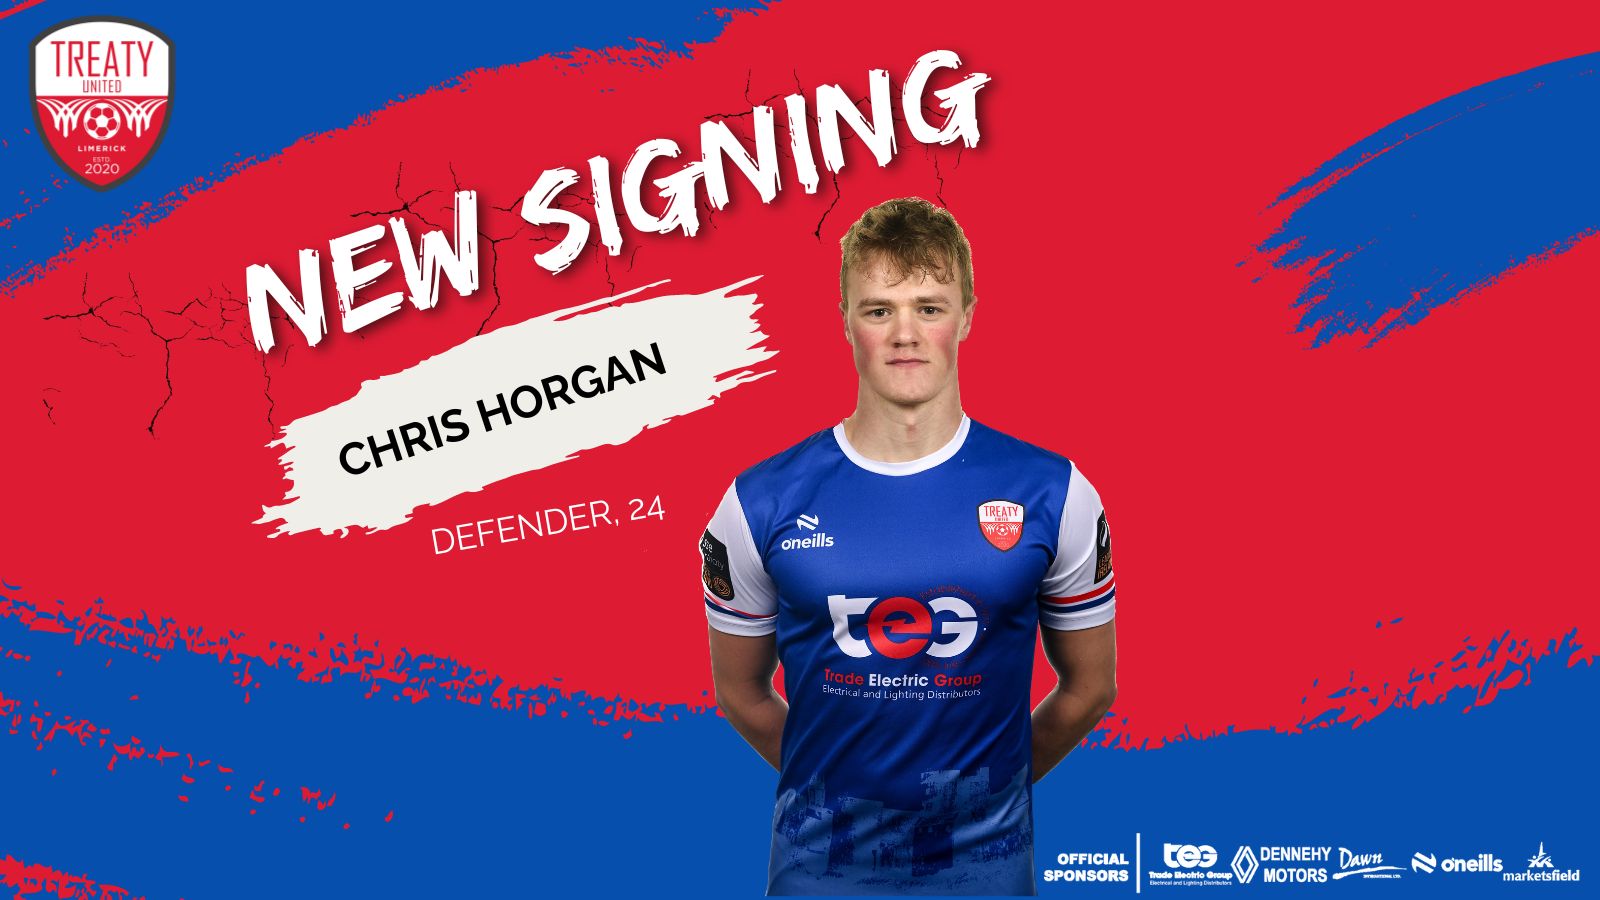 Featured image for “Chris Horgan Signs”